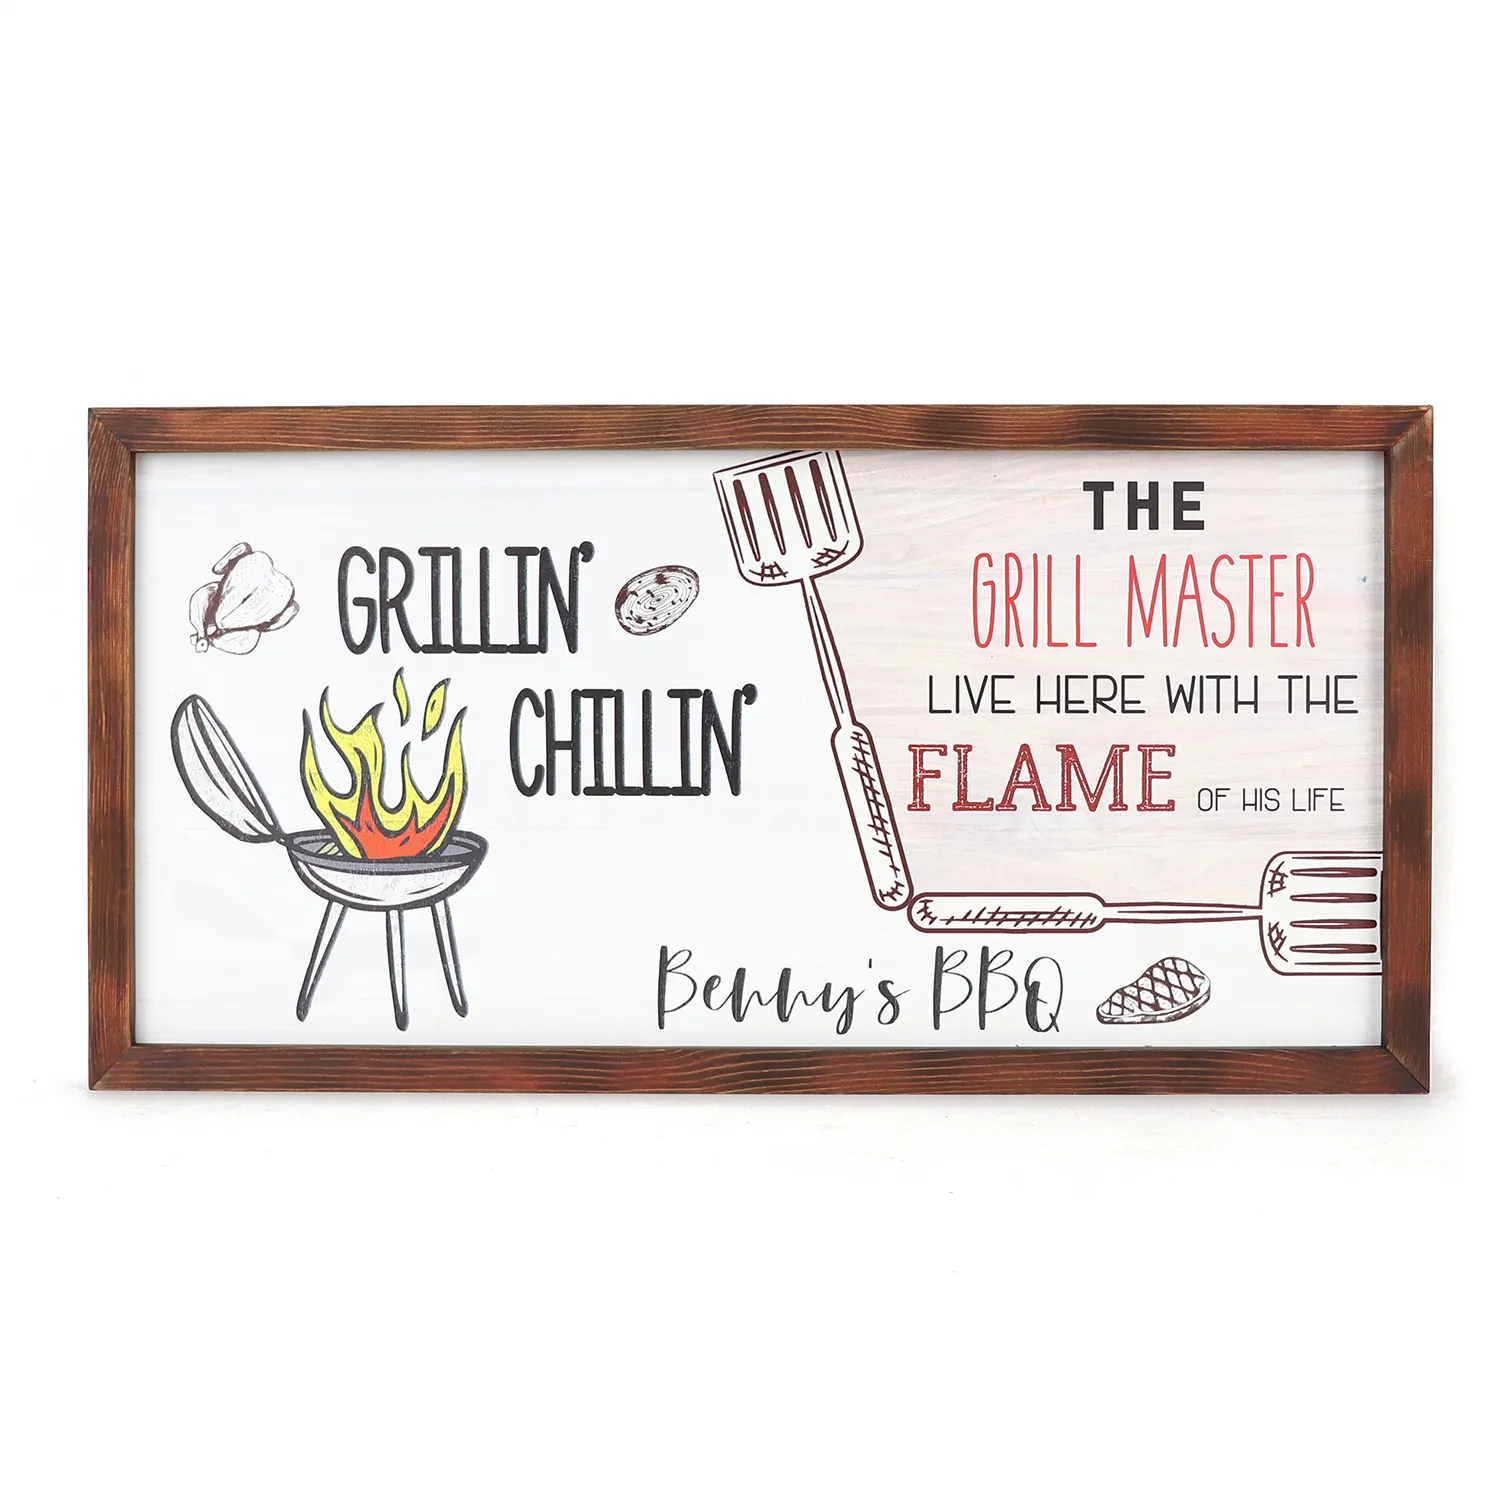 The grill master live here with the flame of his life Personalized 12x24in wooden plaque wooden frame sign